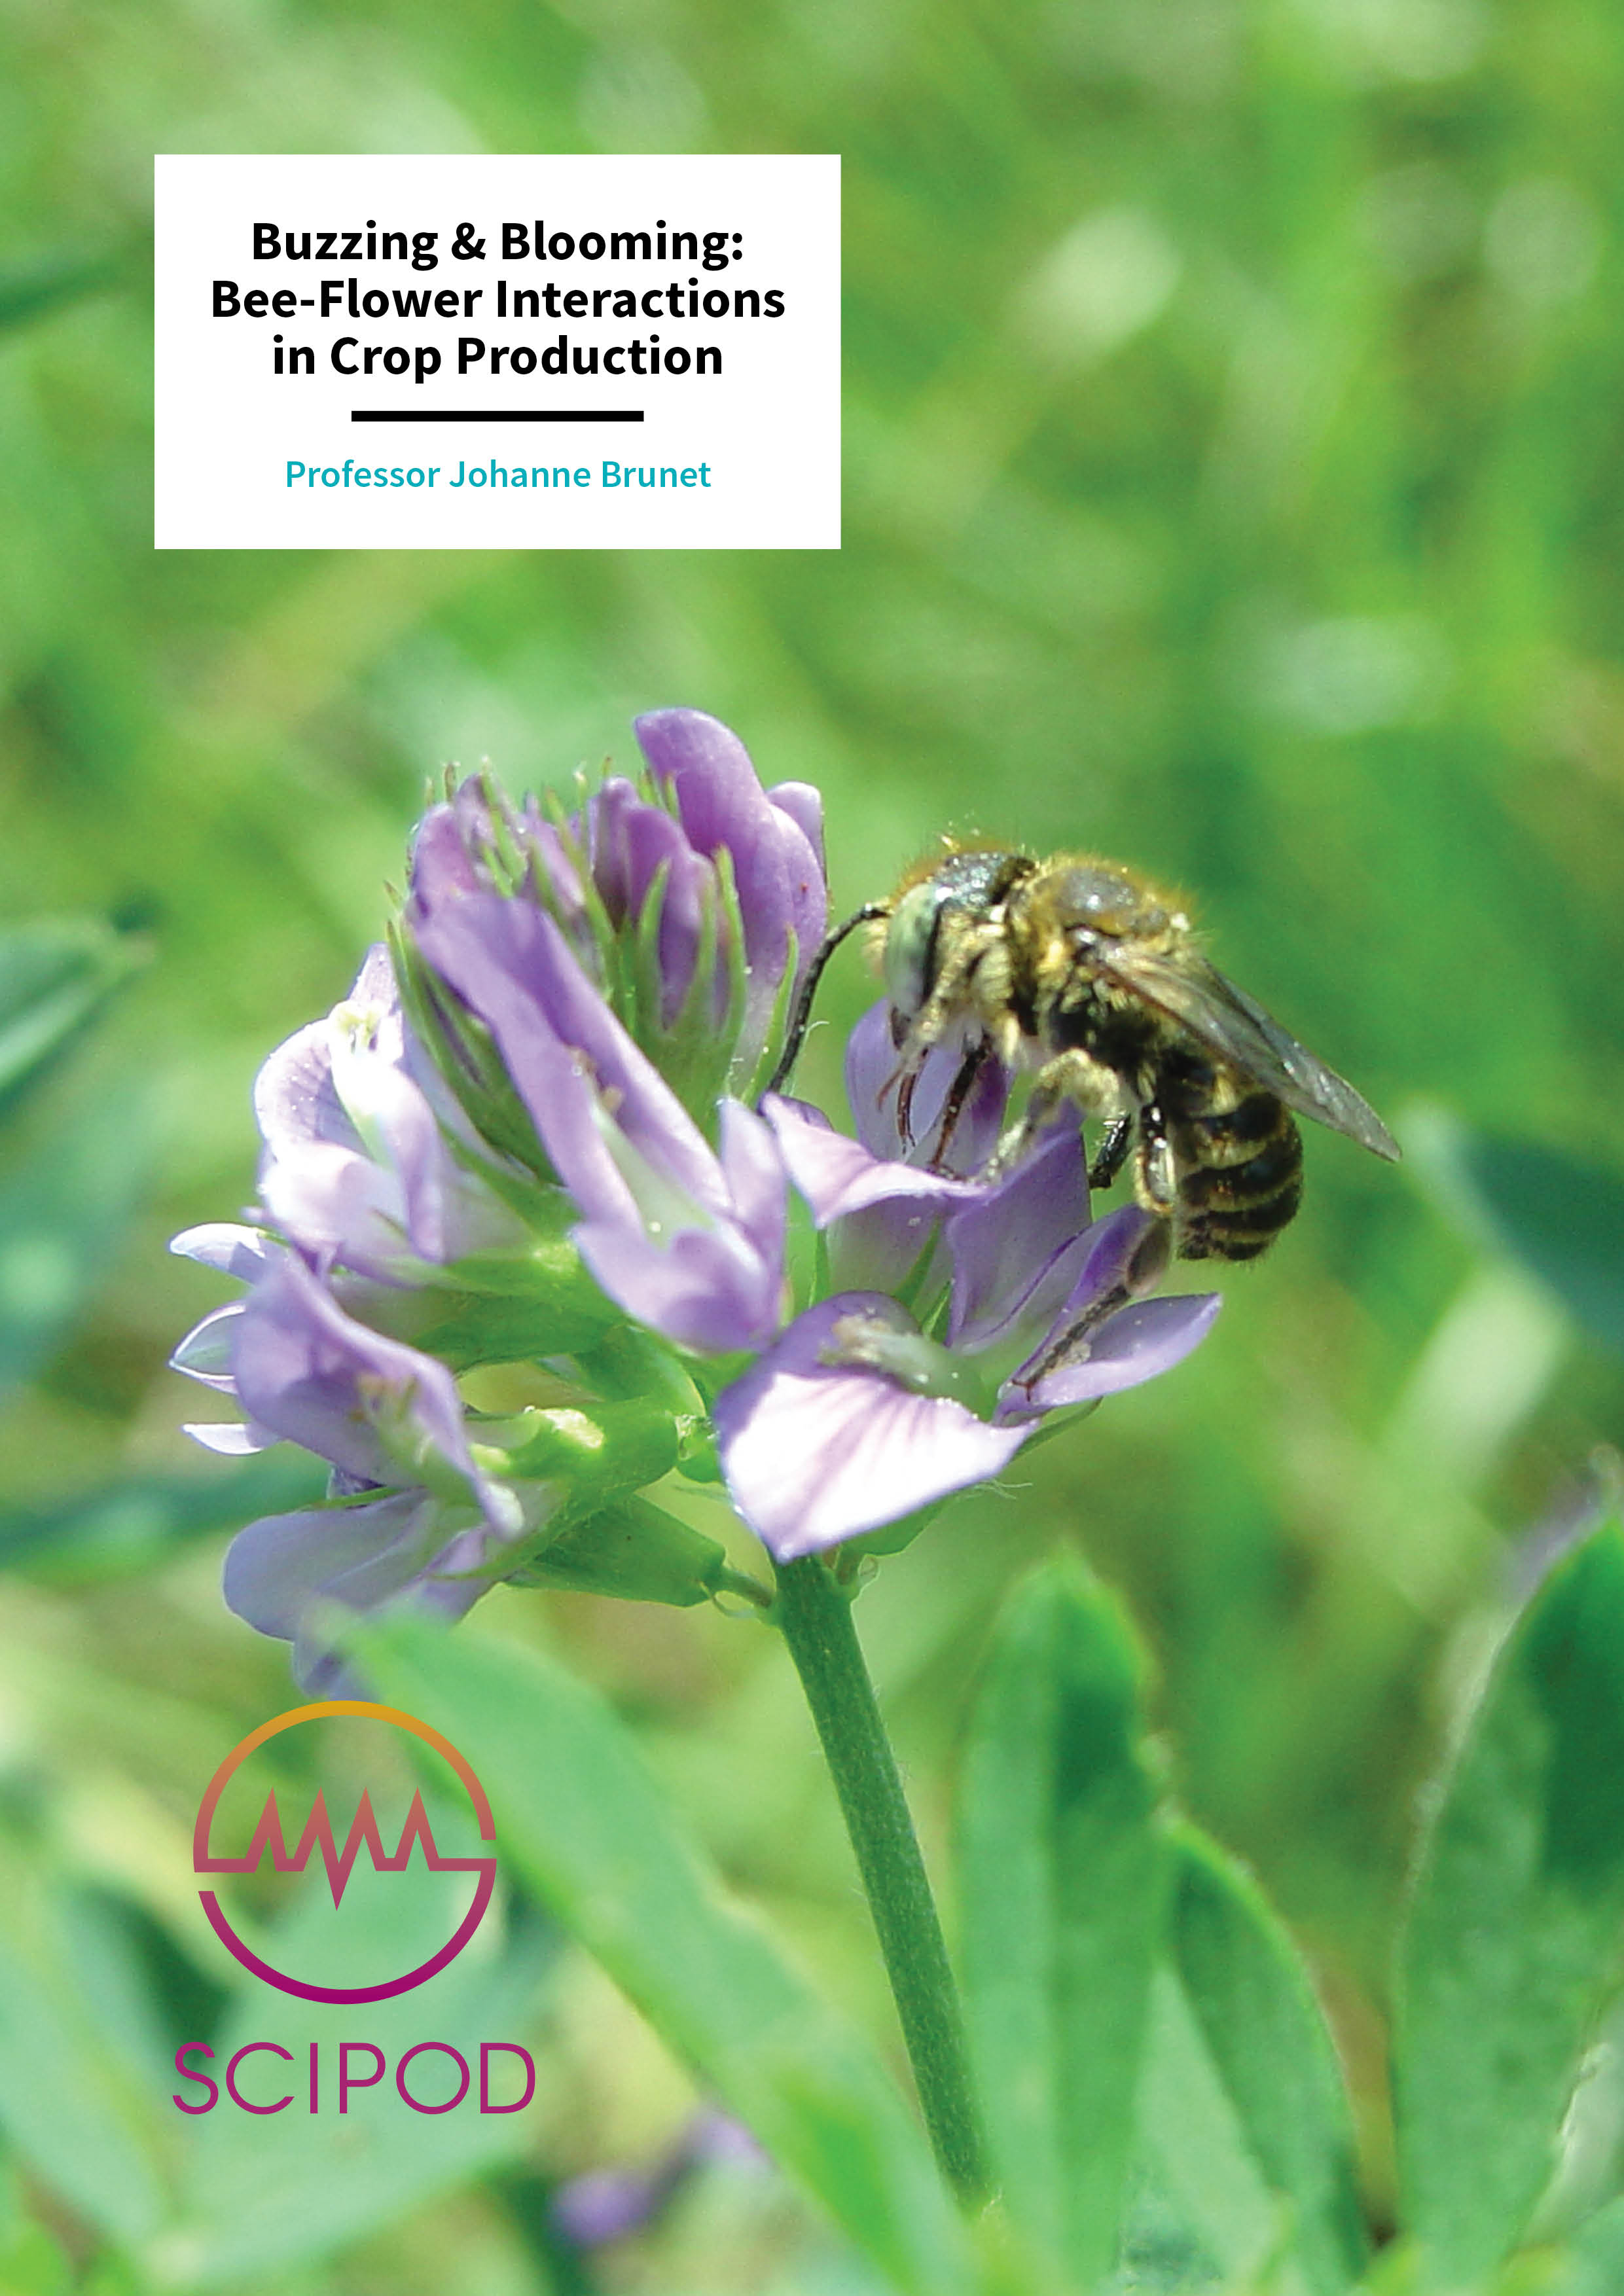 Buzzing & Blooming, Bee-Flower Interactions in Crop Production – Professor Johanne Brunet, USDA-ARS Vegetable Crops Research Unit